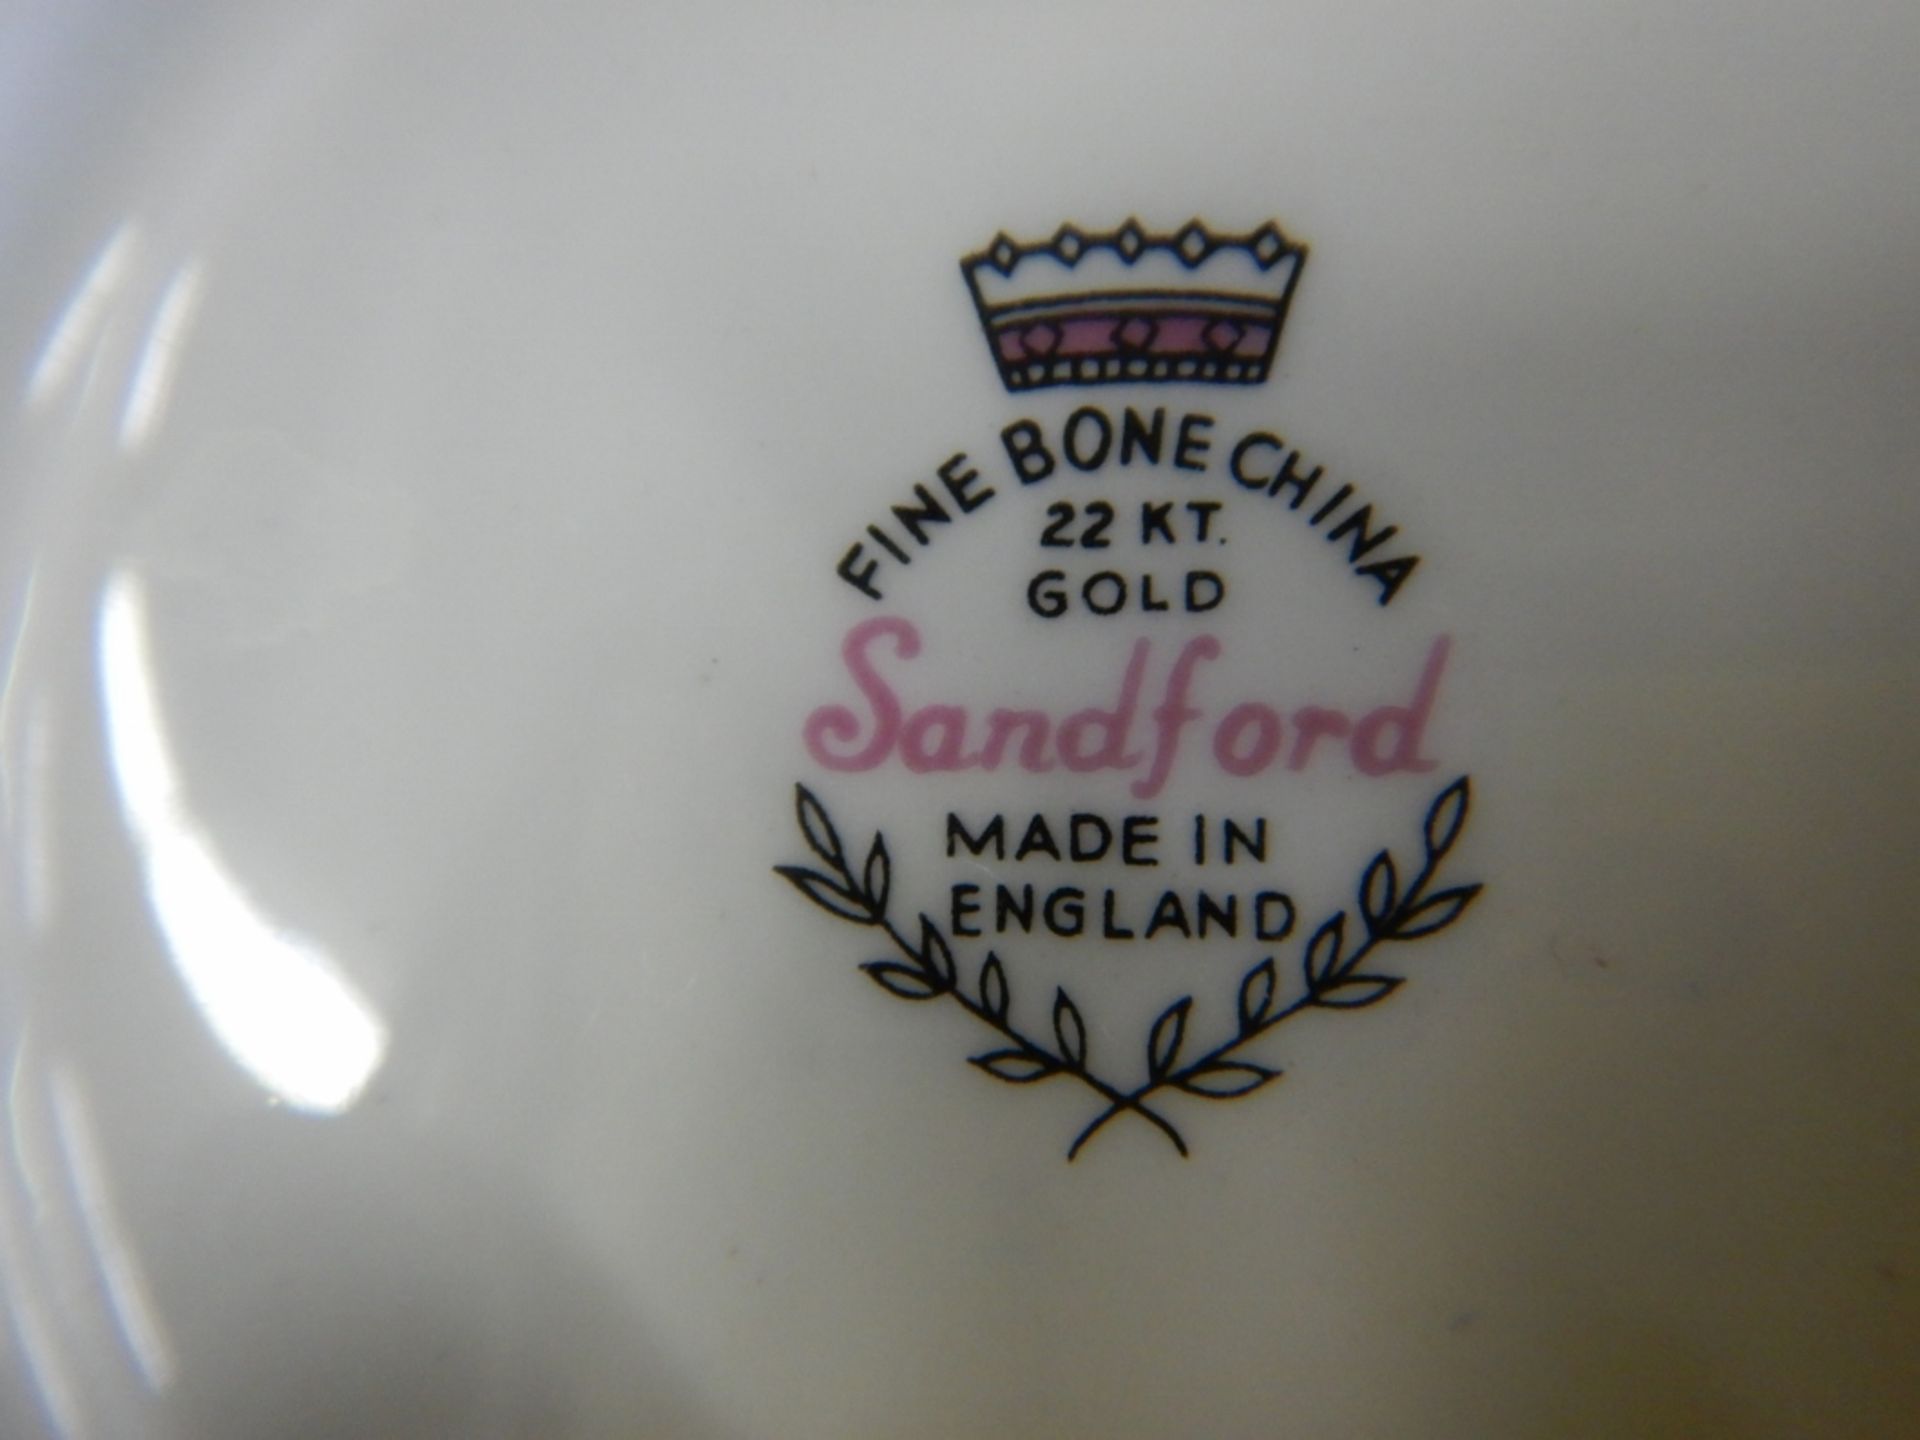 ANTIQUE TEACUPS & SAUCERS - MADE IN ENGLAND - LOT OF 3 - FINE BONE CHINA "PRINCE EDWARD ISLAND" - - Image 5 of 15